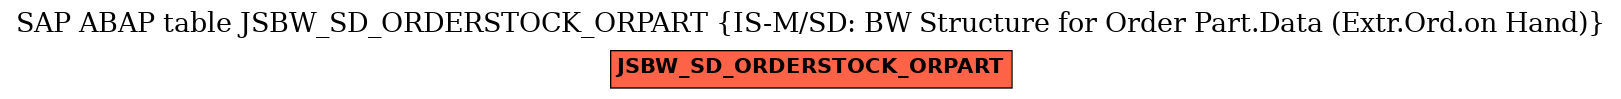 E-R Diagram for table JSBW_SD_ORDERSTOCK_ORPART (IS-M/SD: BW Structure for Order Part.Data (Extr.Ord.on Hand))